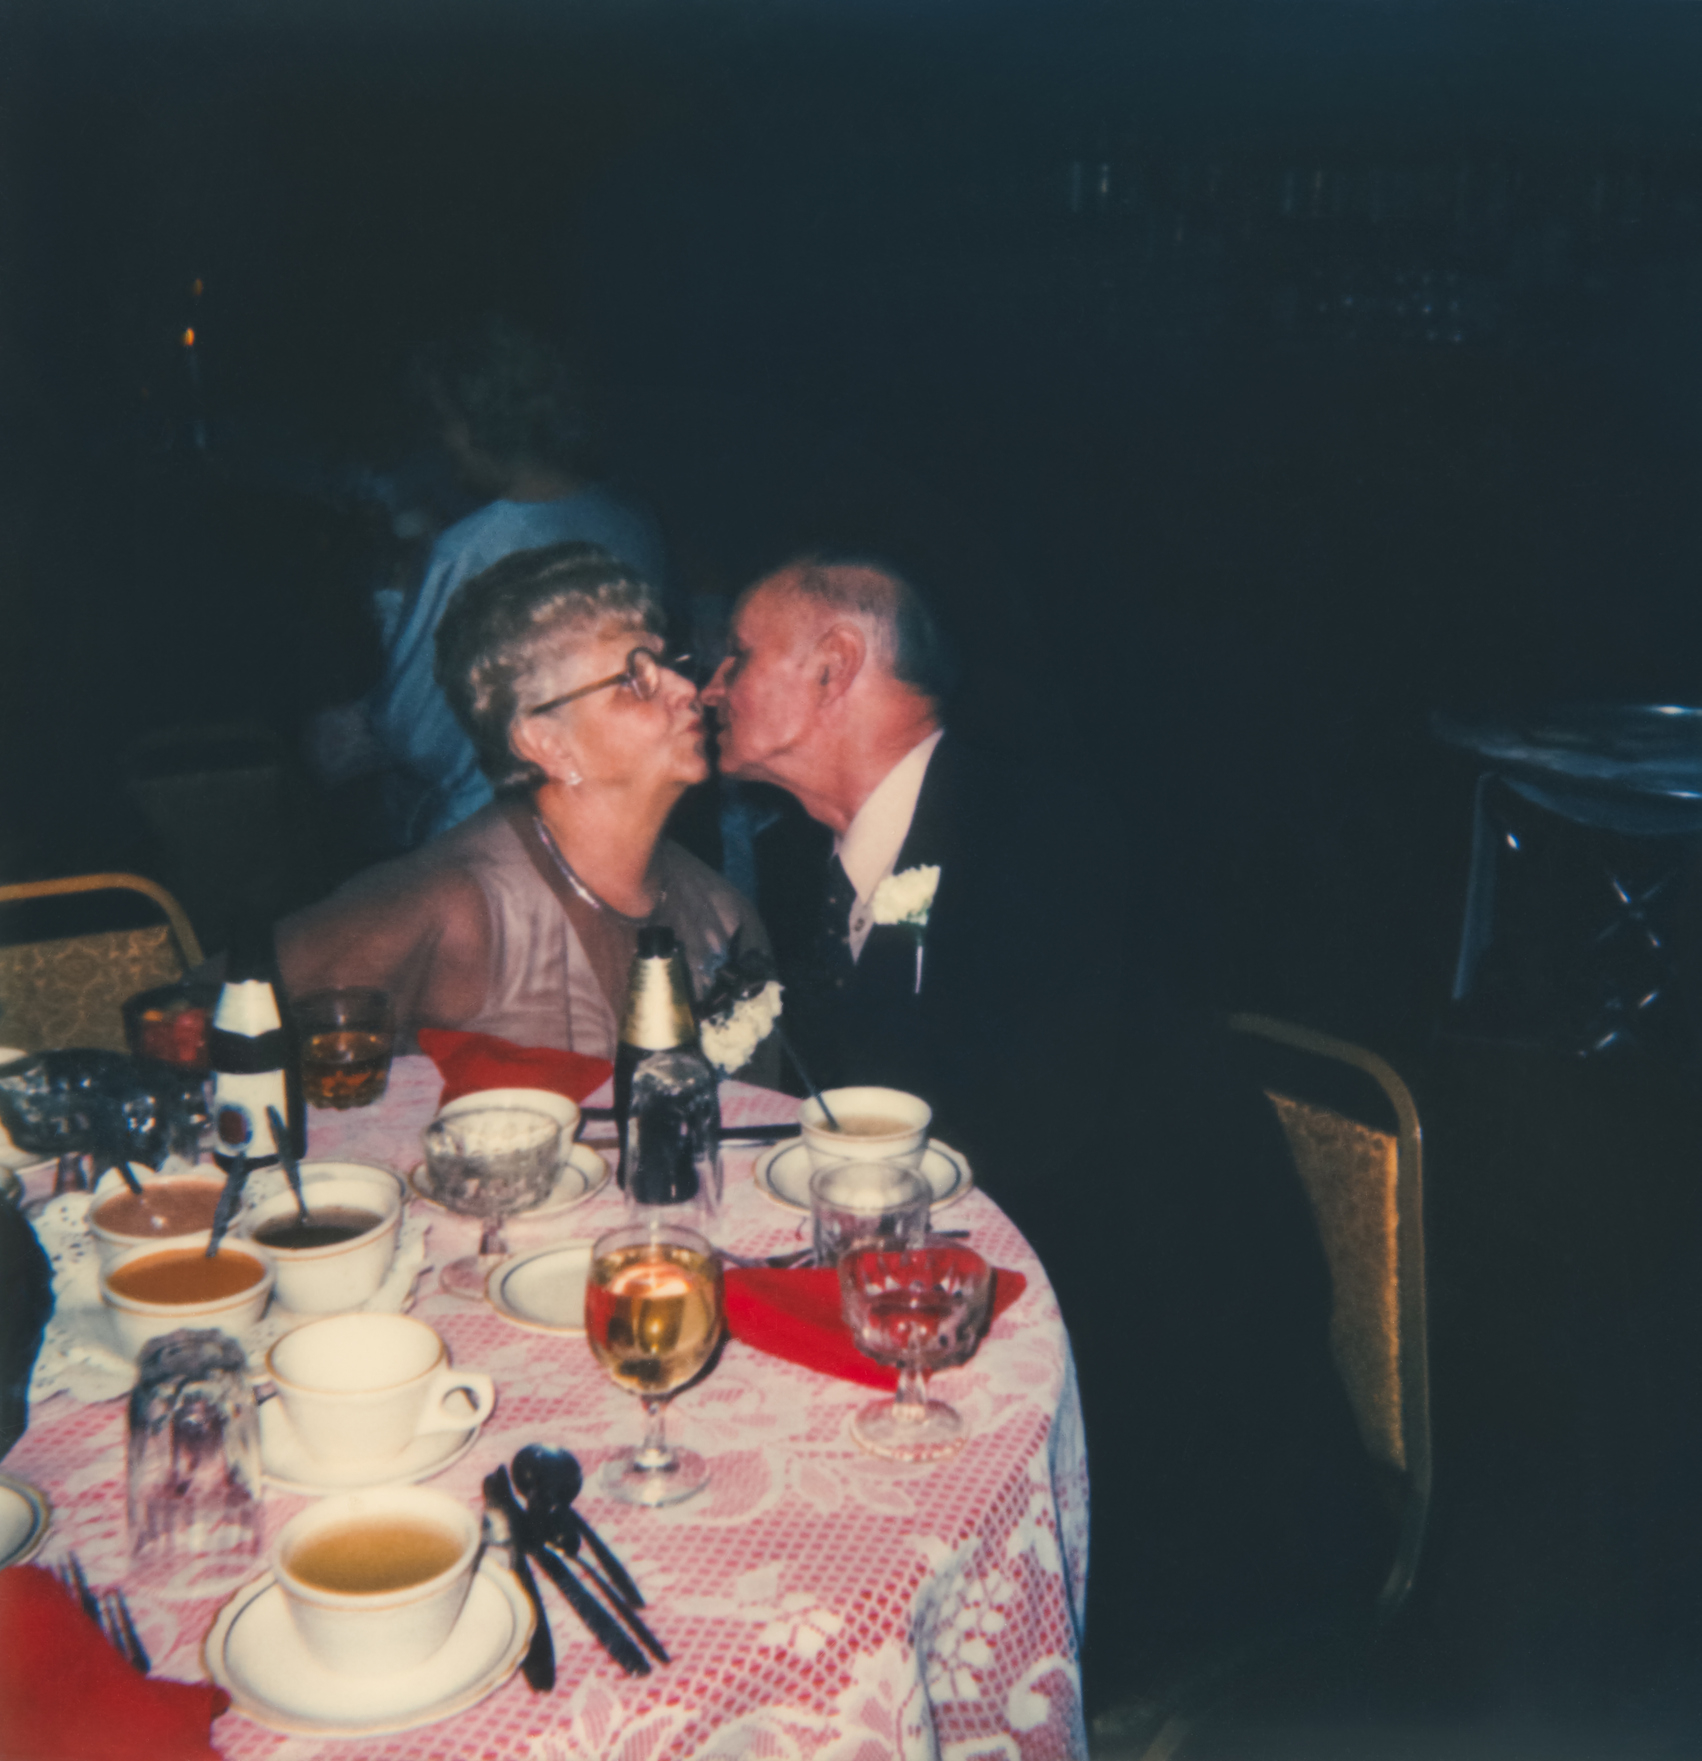 Older couple sharing a kiss at a dining table set with cups and dishes